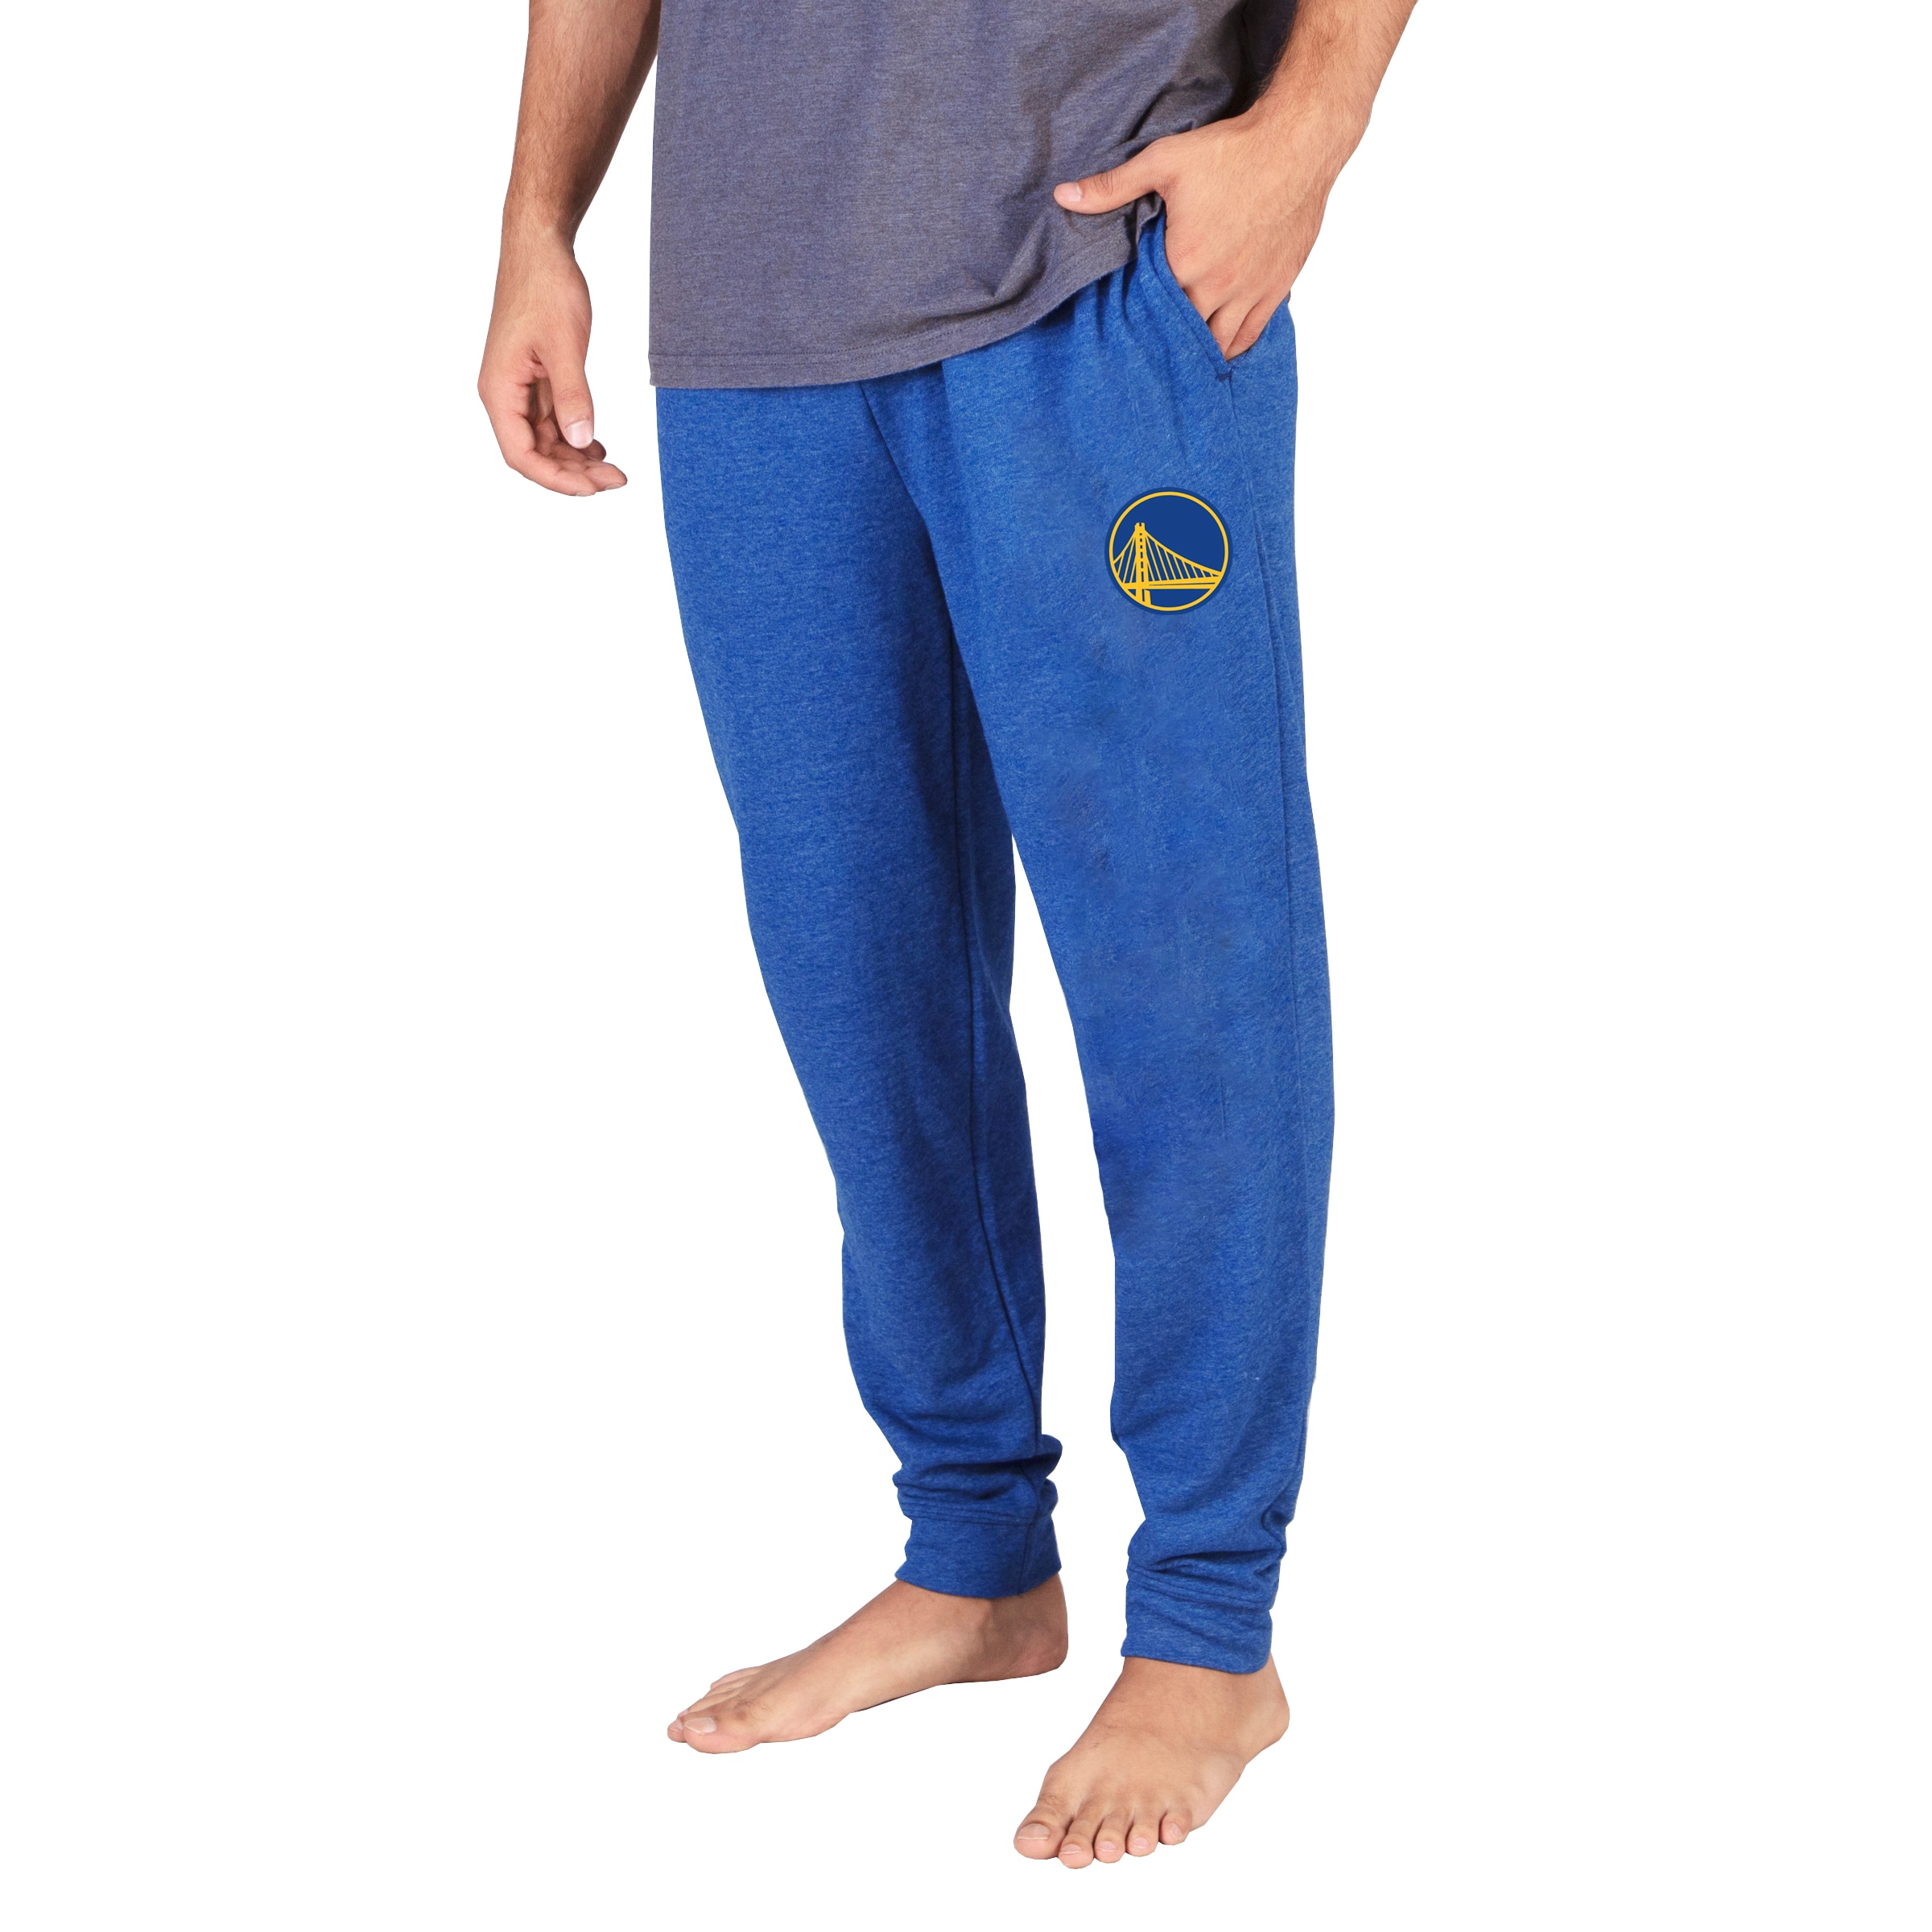 Men's Concepts Sport Royal Golden State Warriors Mainstream Cuffed Terry Pants - image 1 of 1